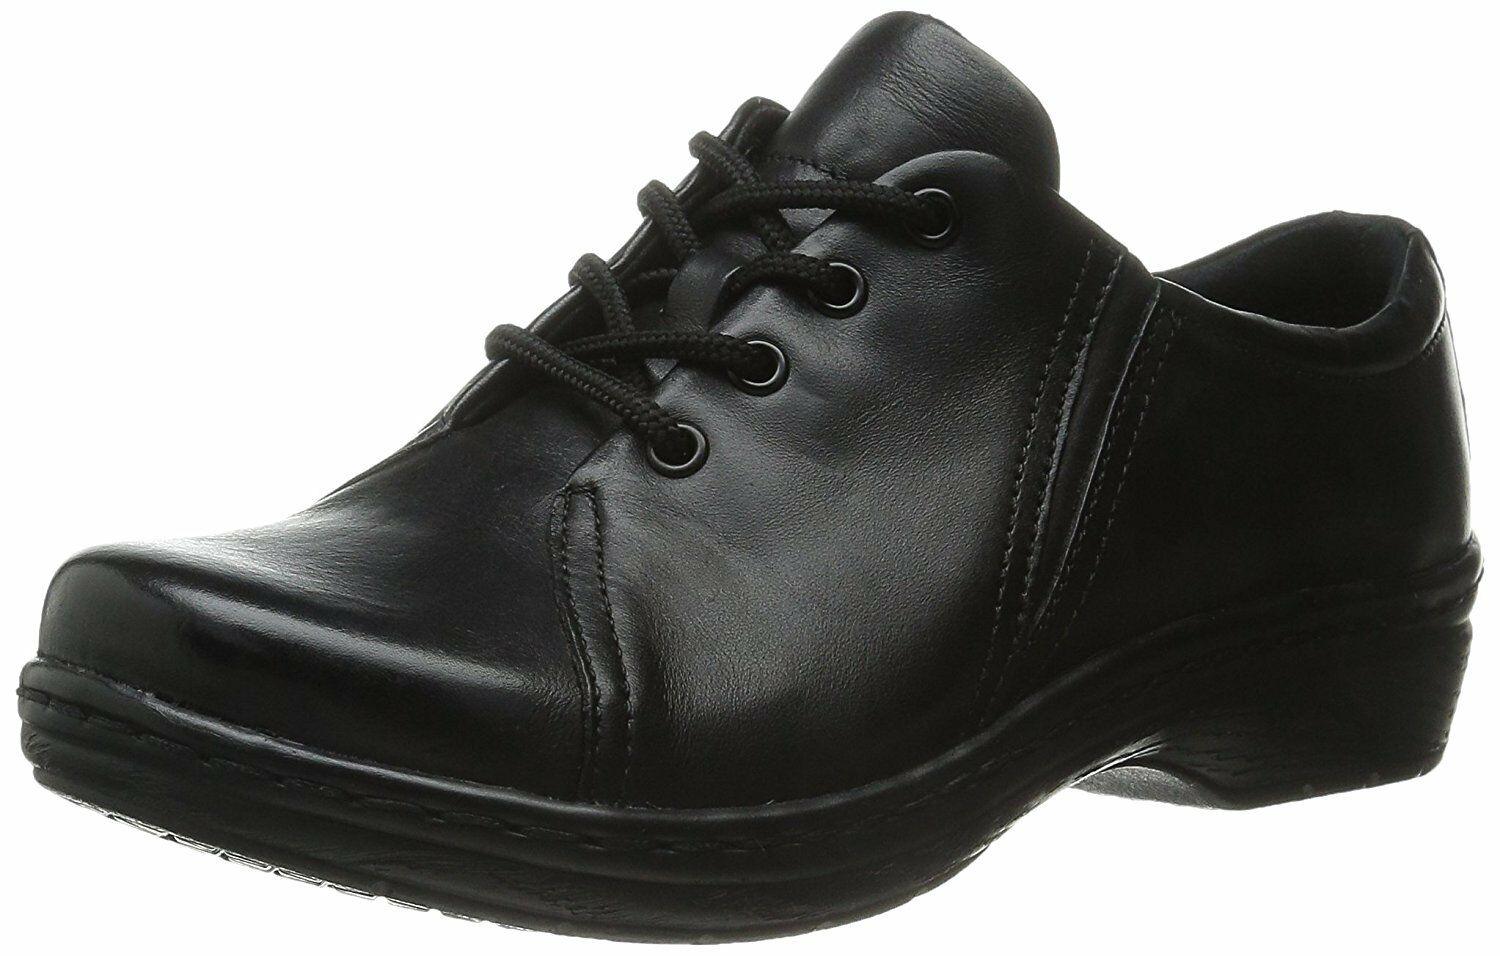 Klogs Illusion Womens  Black Leather Illusion Clog Lace Up Oxford Shoes  US 6 - SVNYFancy